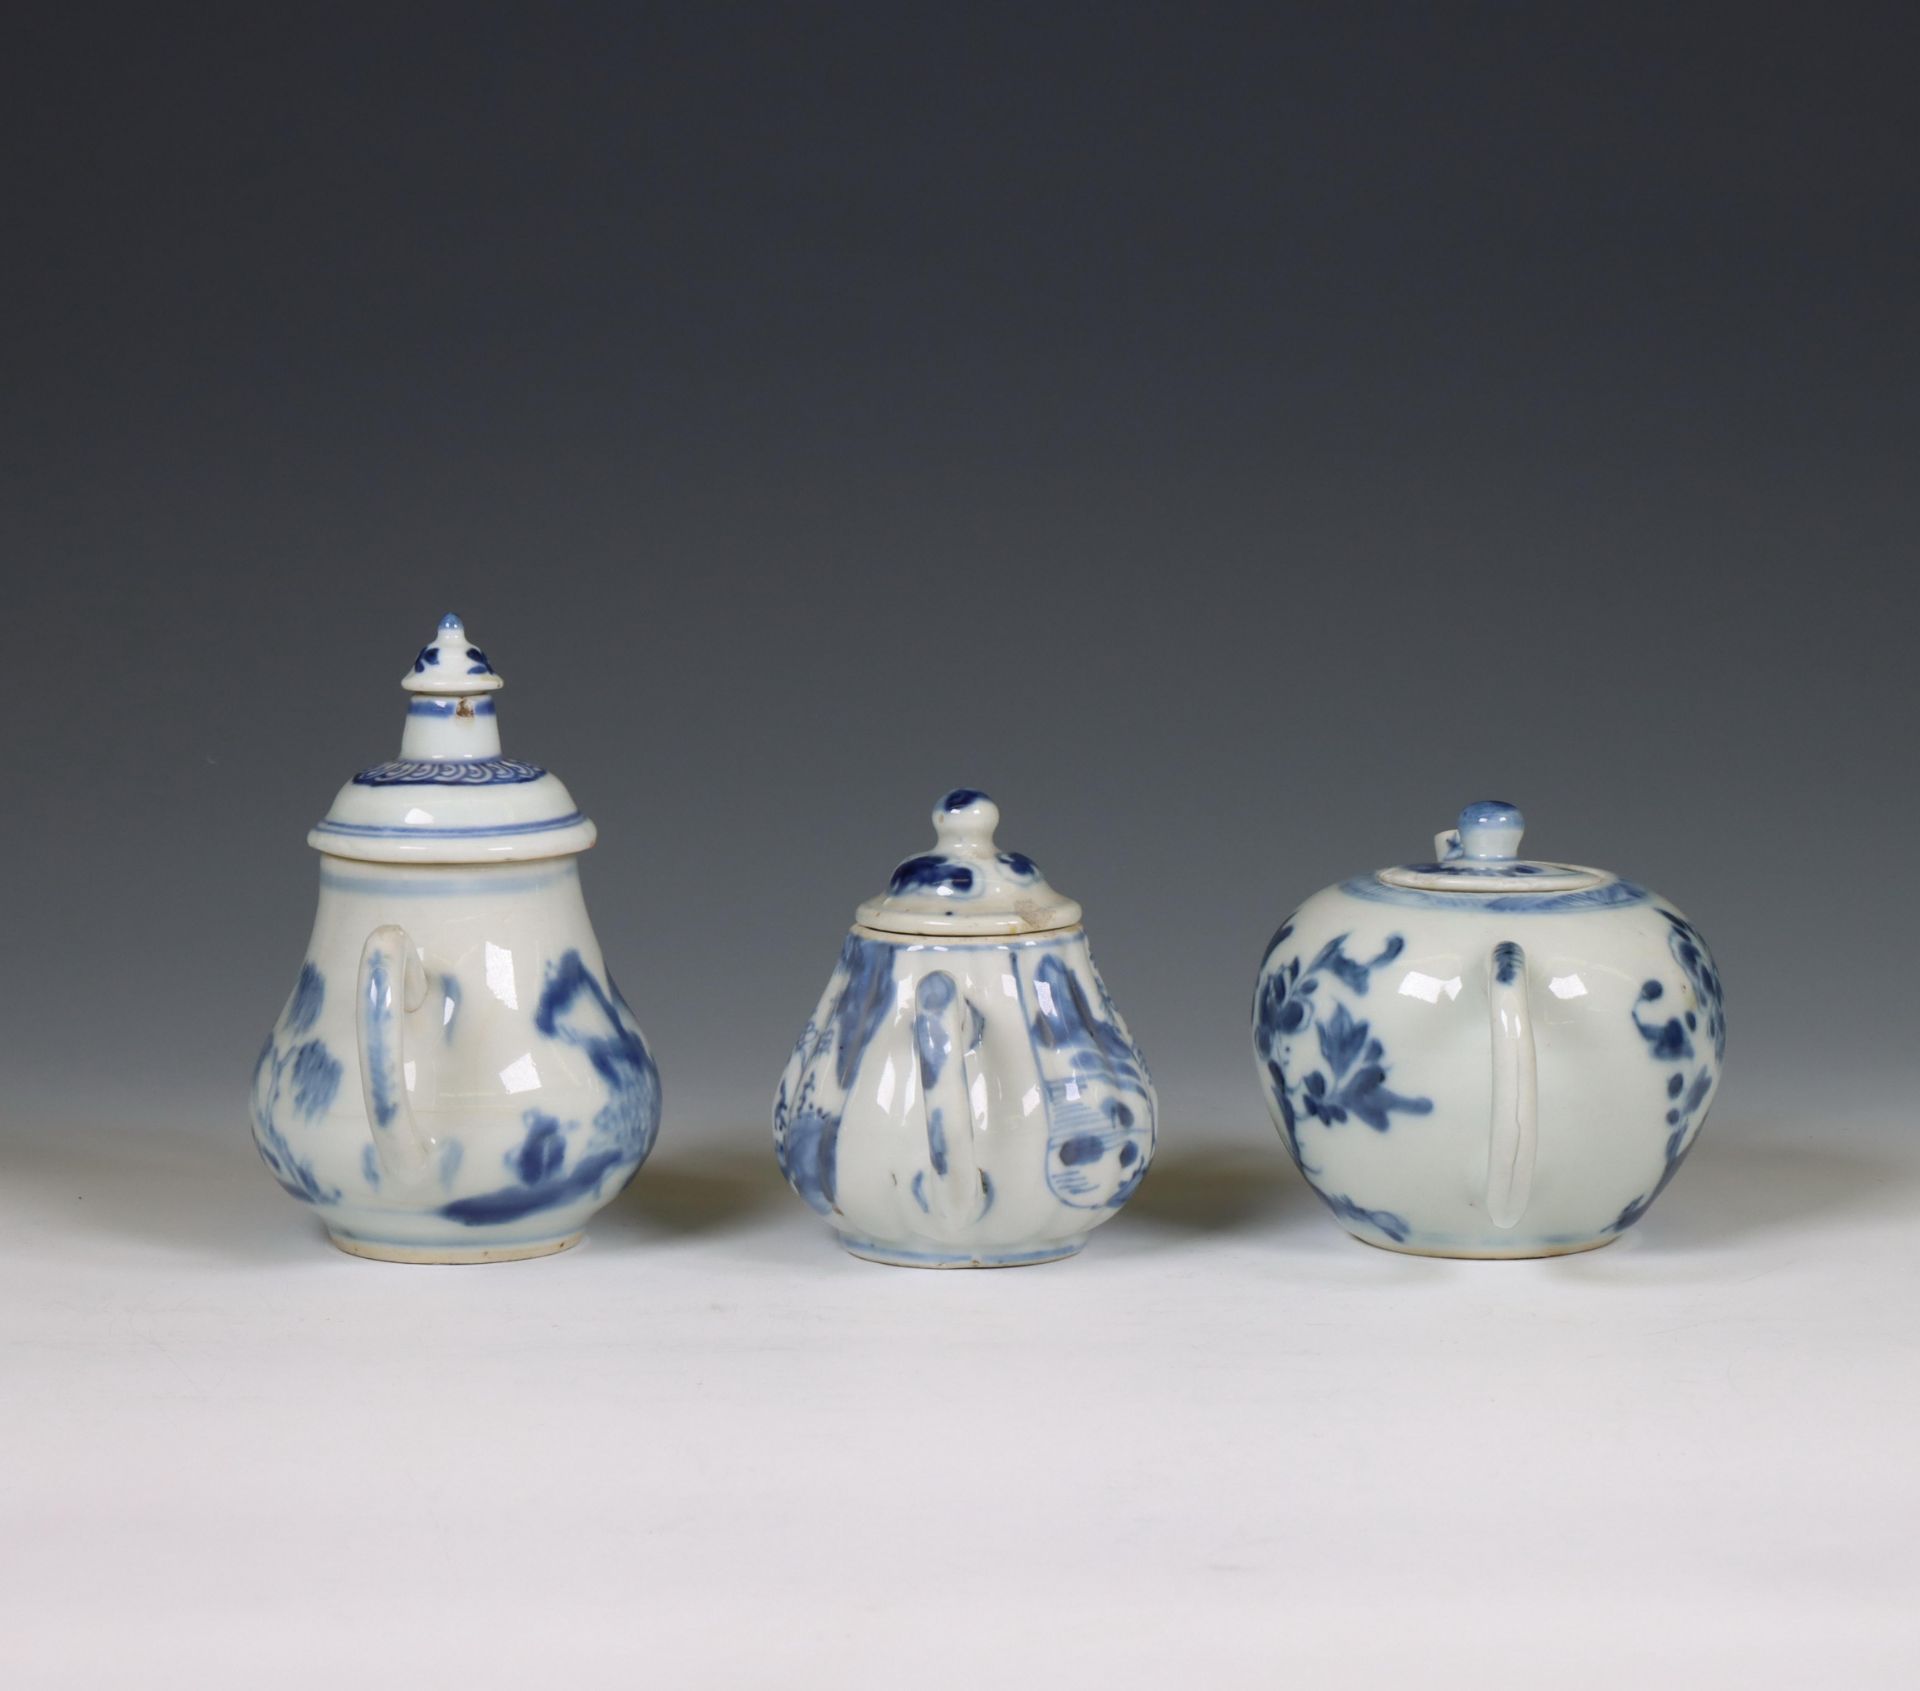 China, three blue and white porcelain teapots, 18th century, - Image 6 of 6